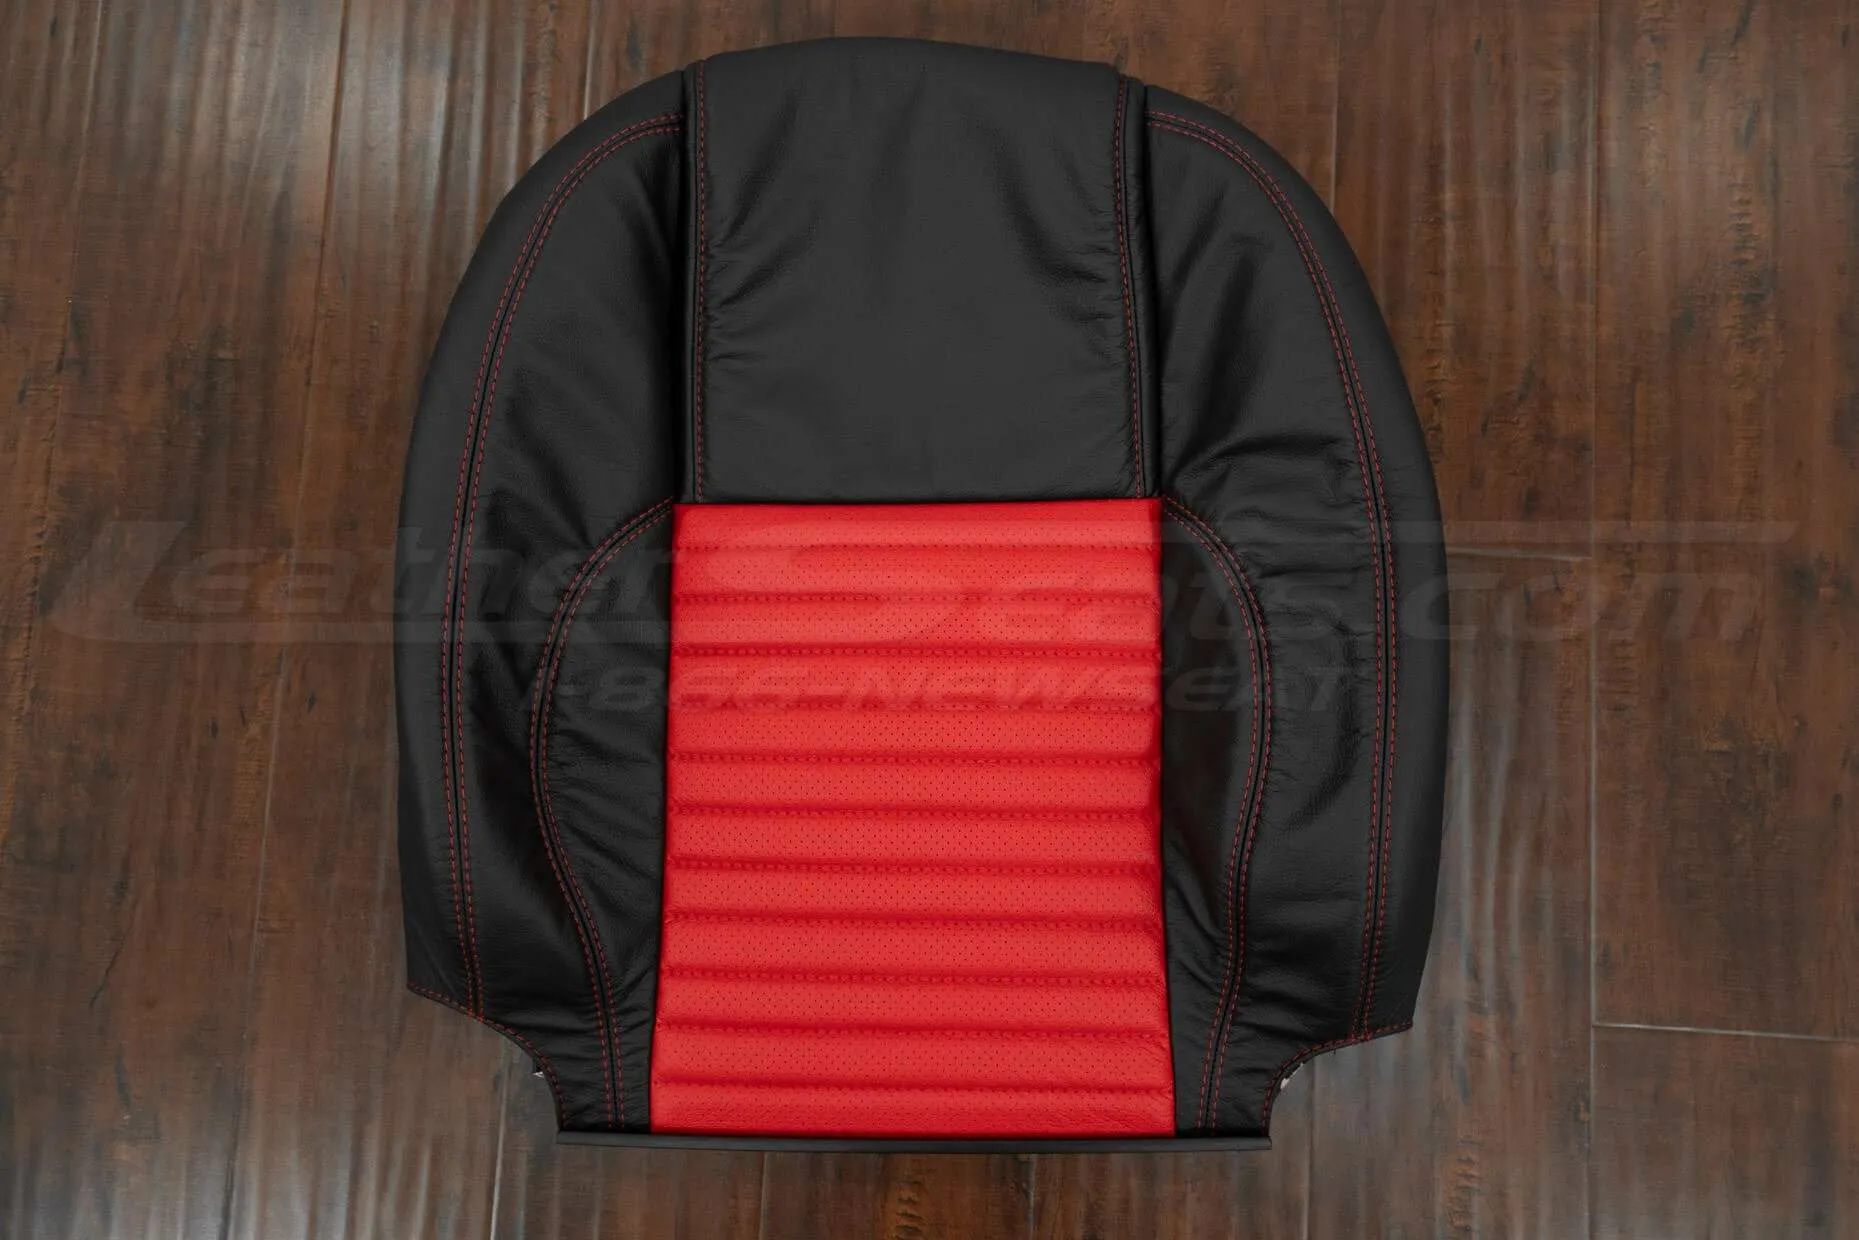 Two-Tone leather front backrest upholstery in Black & Bright Red